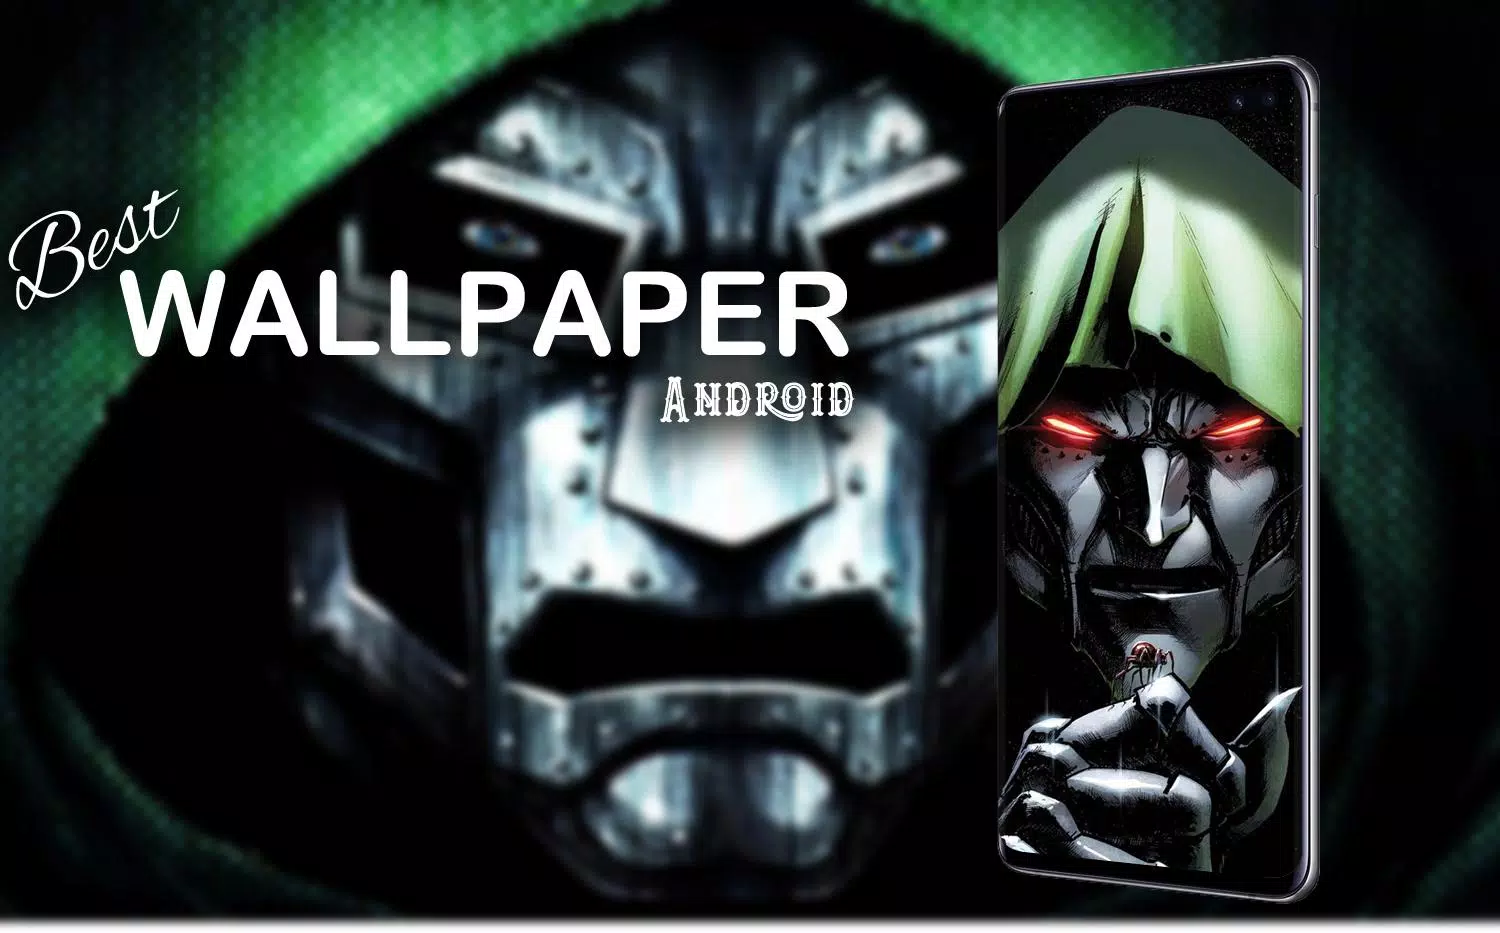 Doctor doom wallpaper hd apk for android download